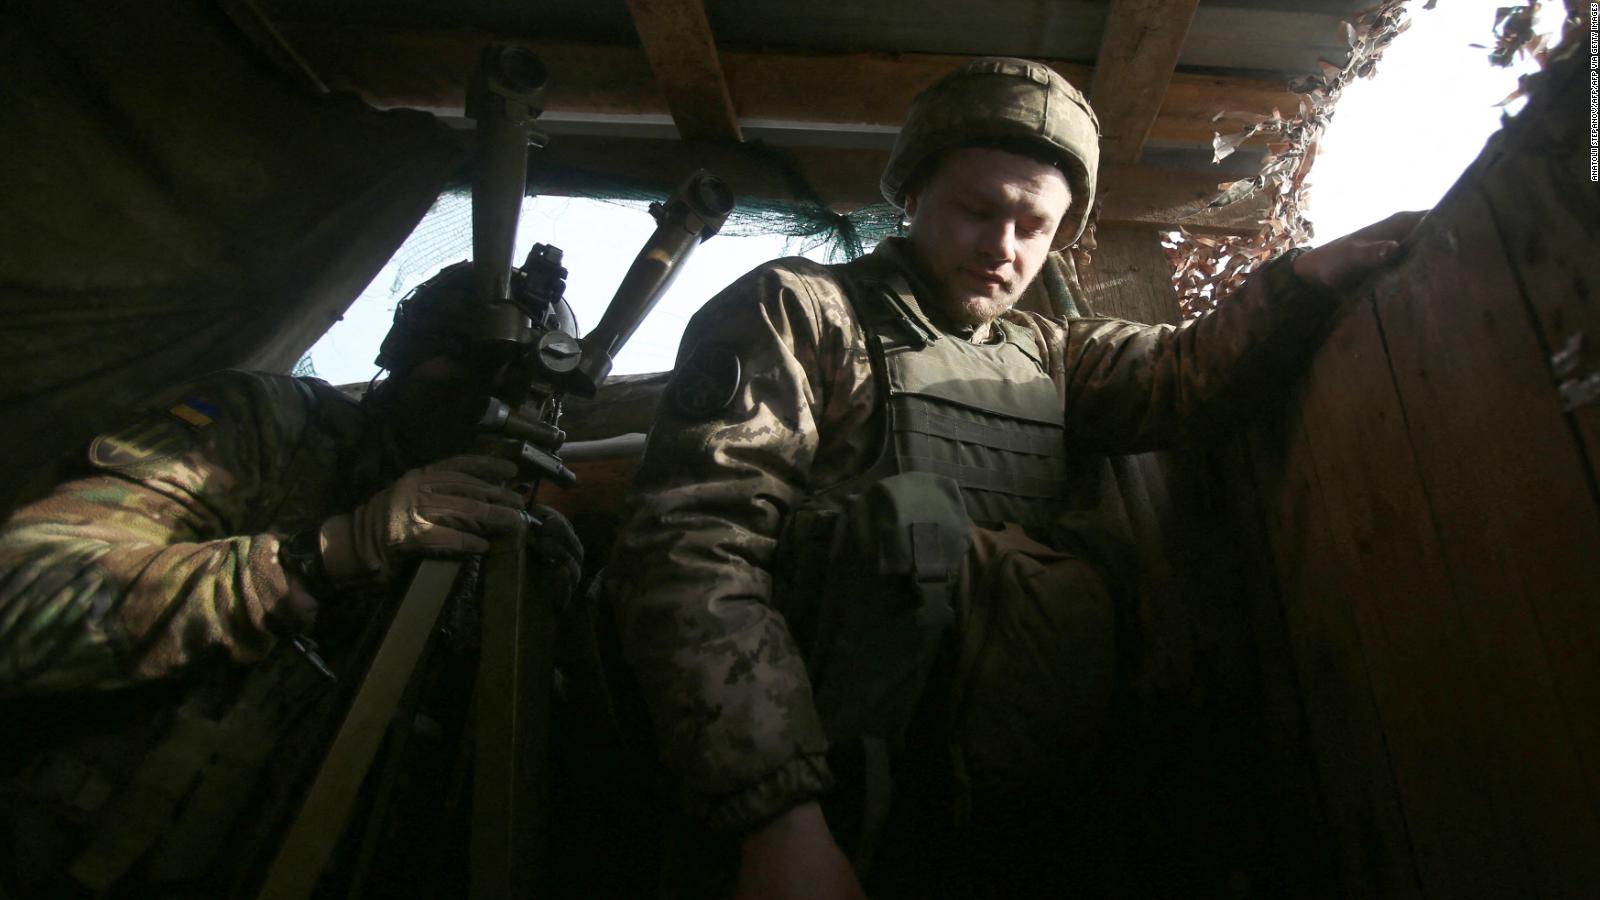 Face to face: the military power of Russia and Ukraine